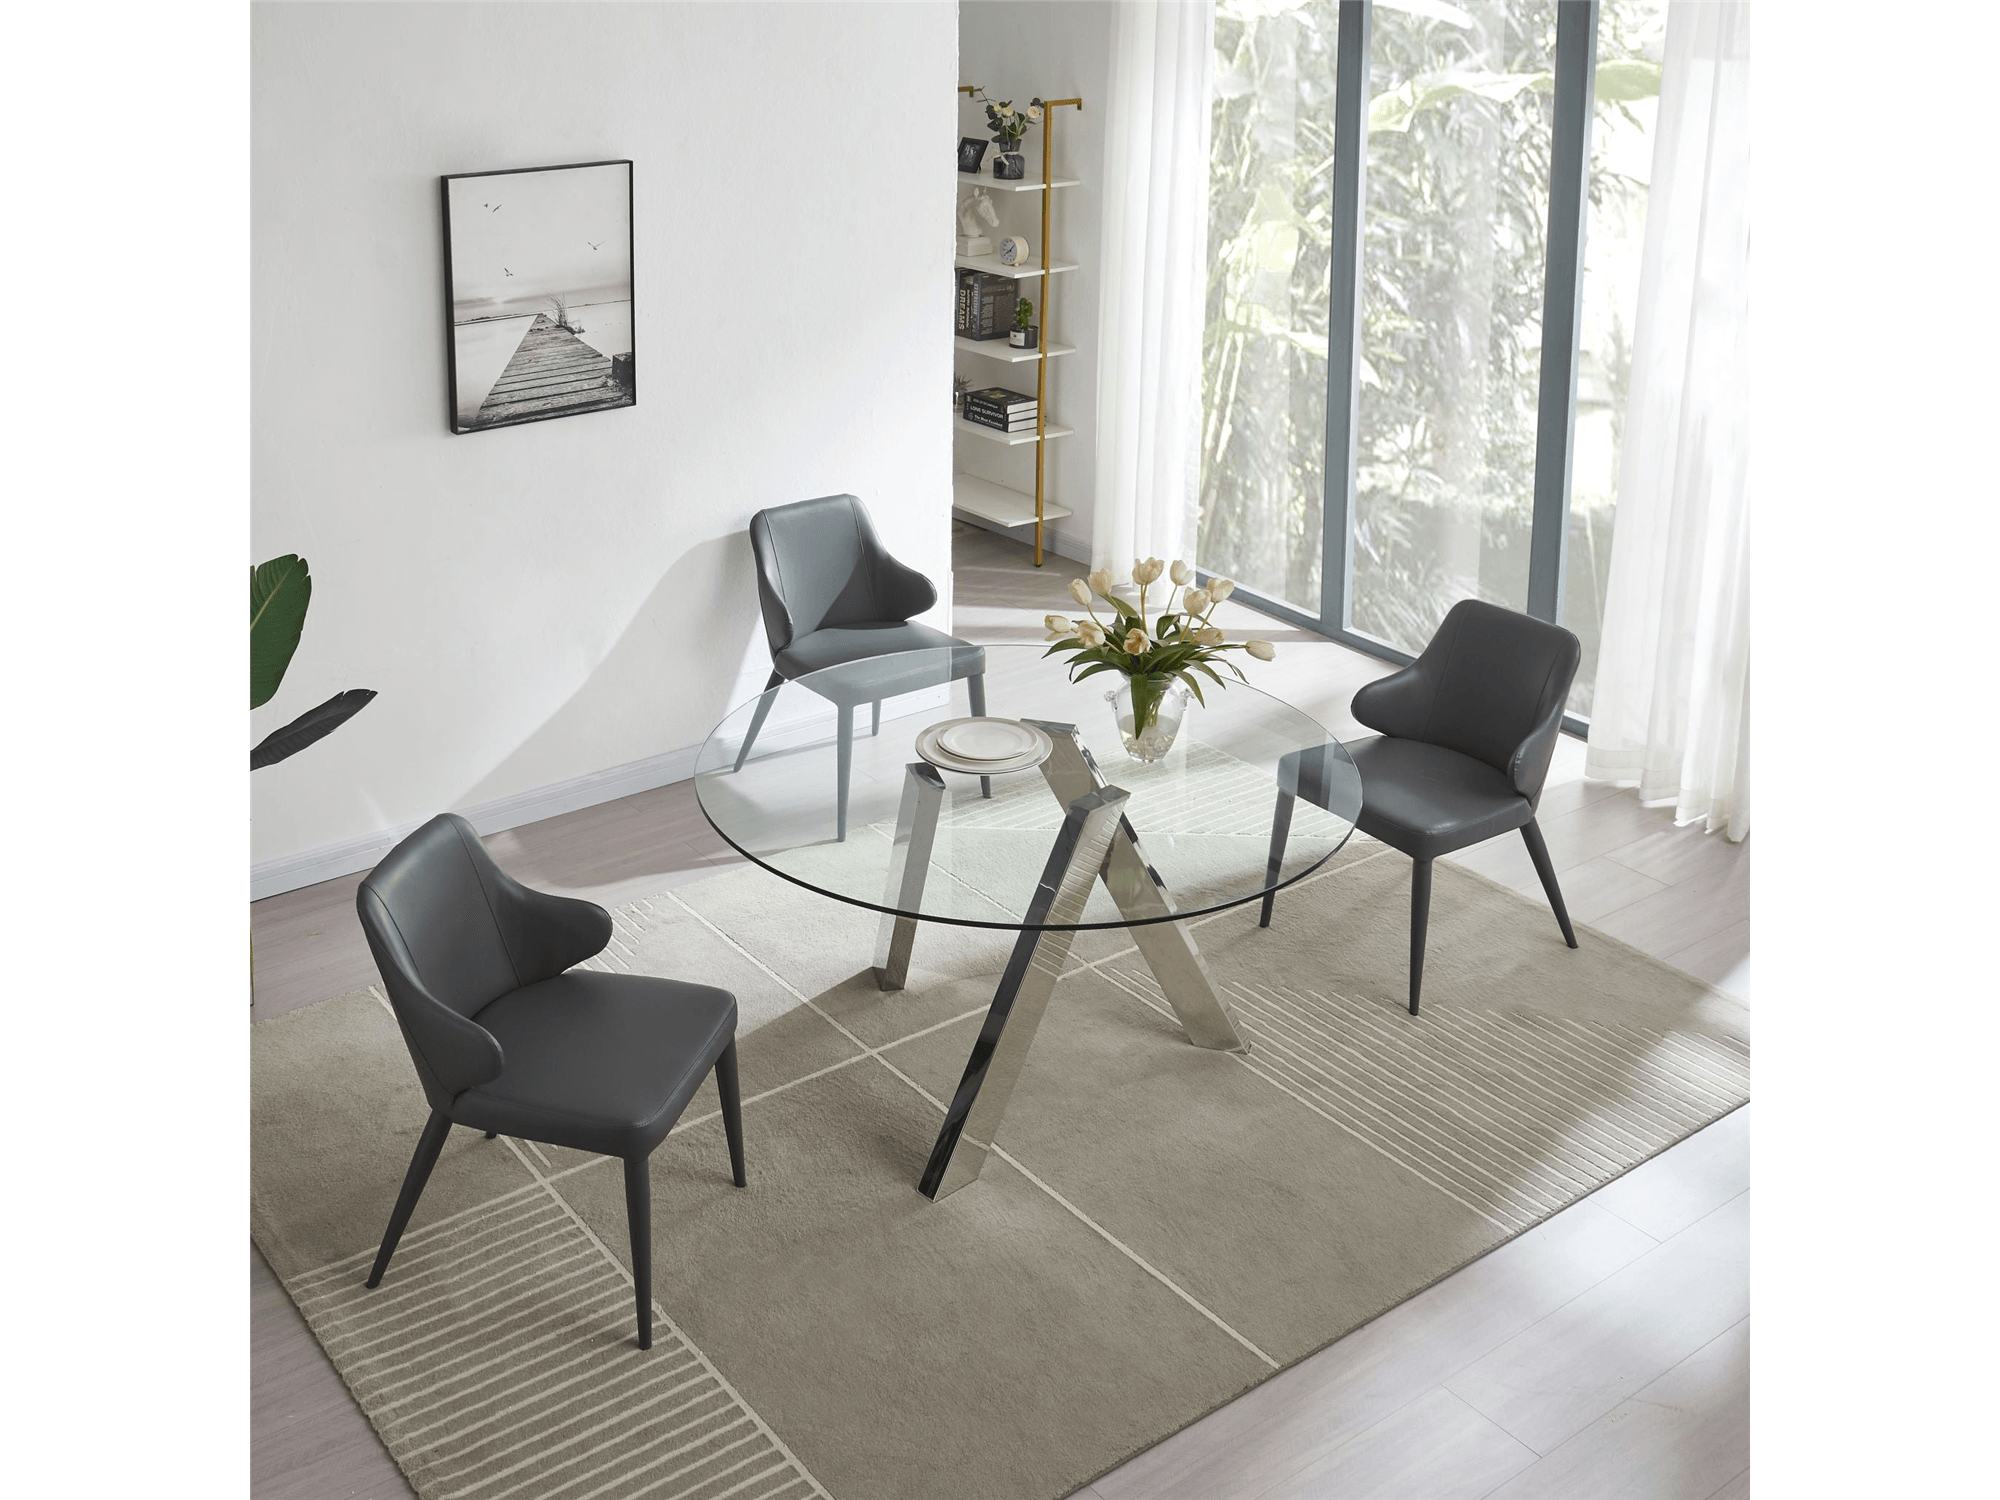 Ping Round Table - Euro Living Furniture